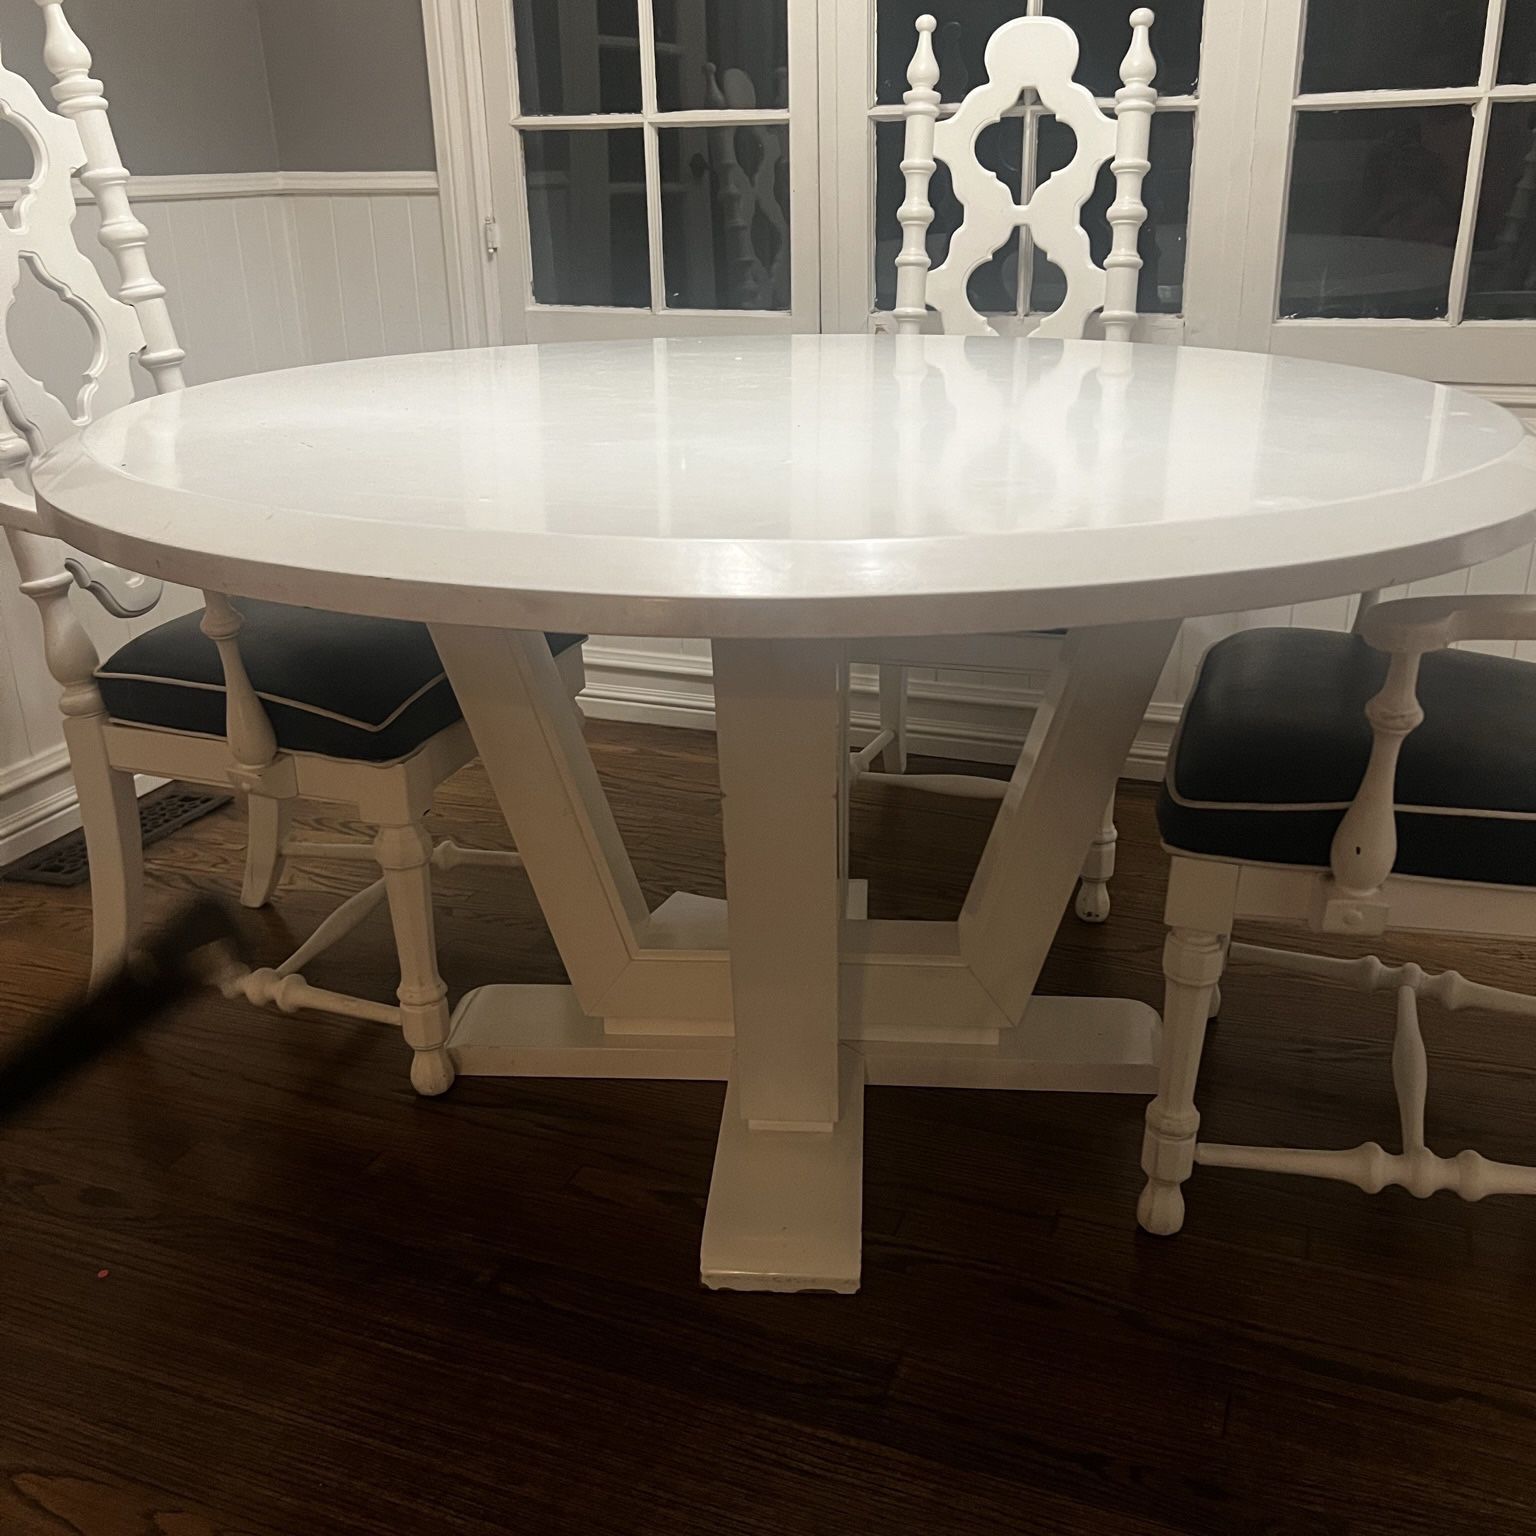 Circular Dining Table - 56” Diameter - Solid Wood, Lacquered White